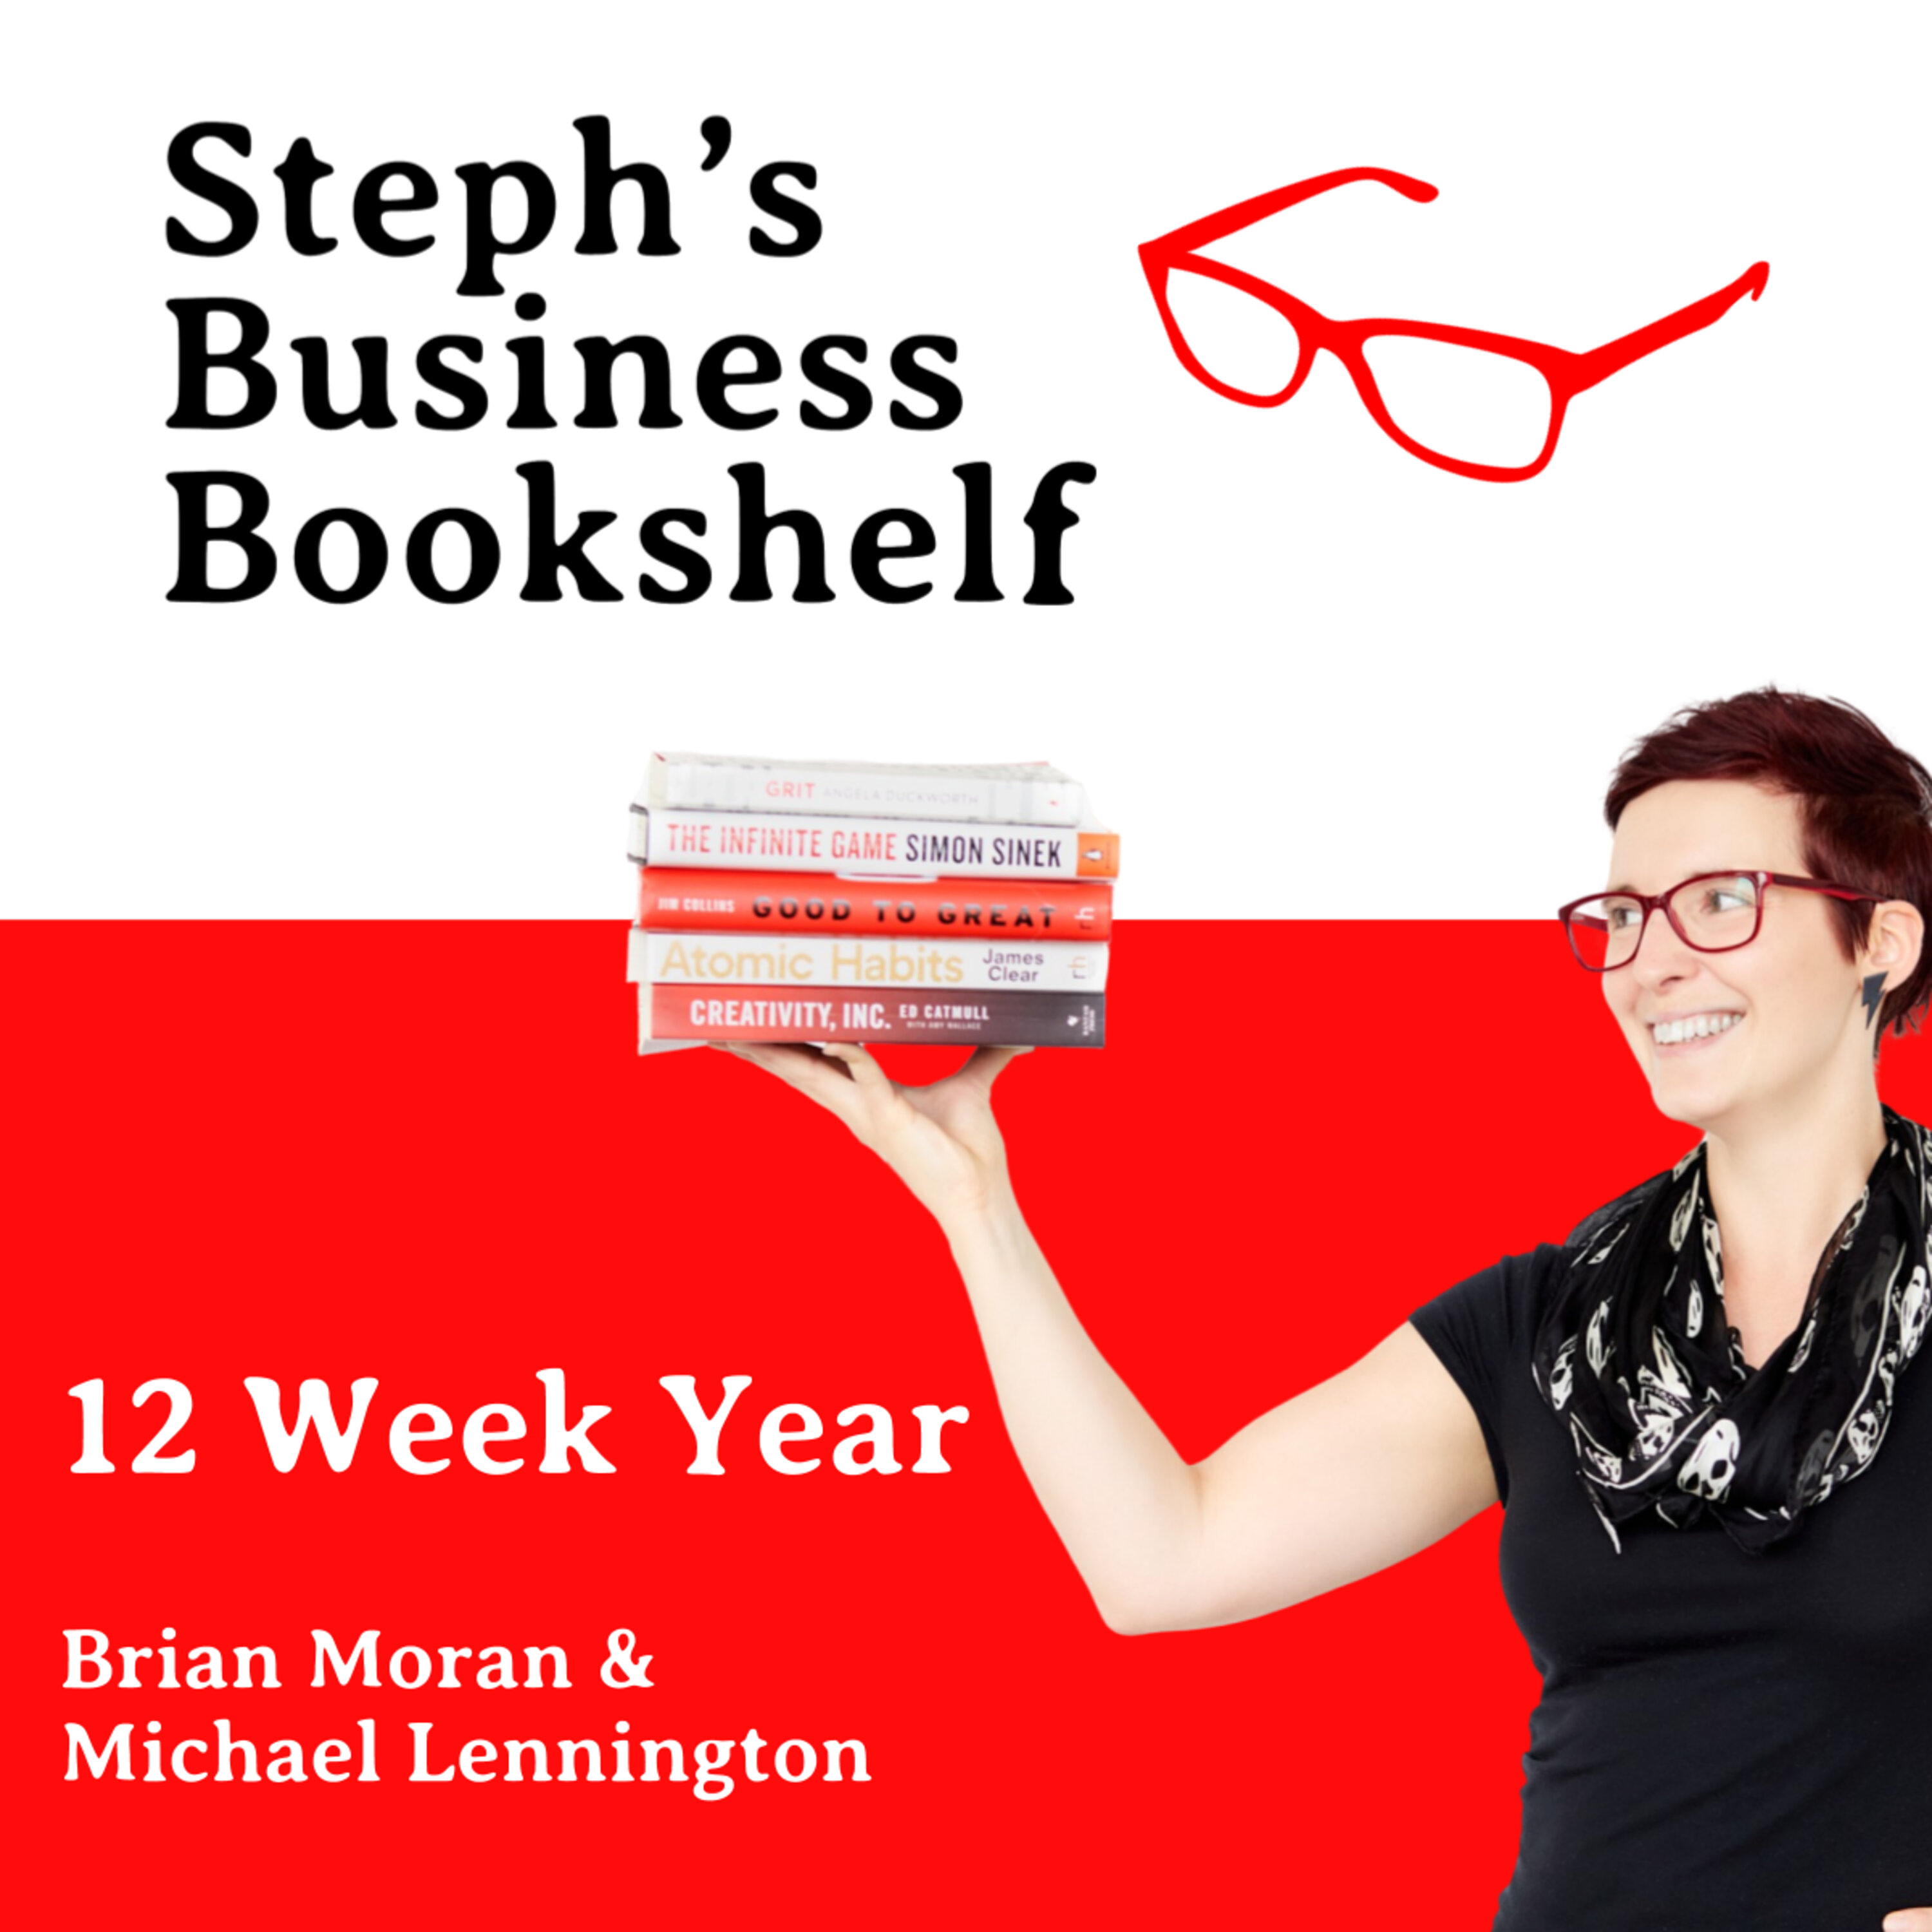 The 12 Week Year by Brian Moran & Michael Lennington: How to stop wasting your time and your years